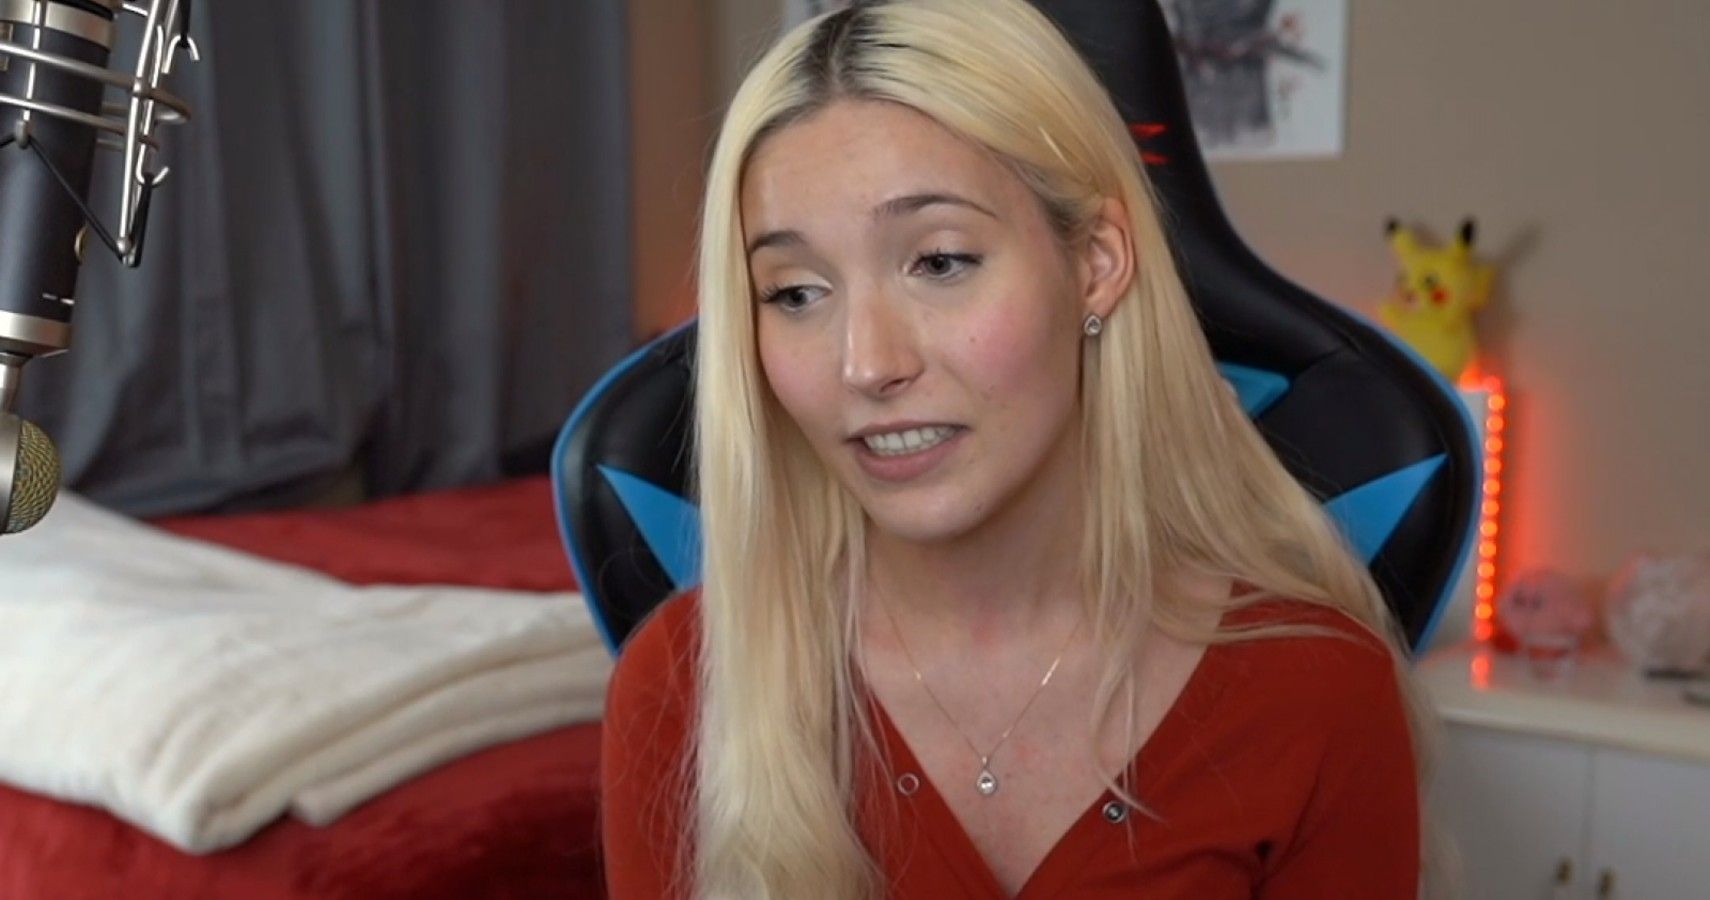 Streamer Jenna Has Been Unpartnered Following The Leak Of Racist Chat Logs